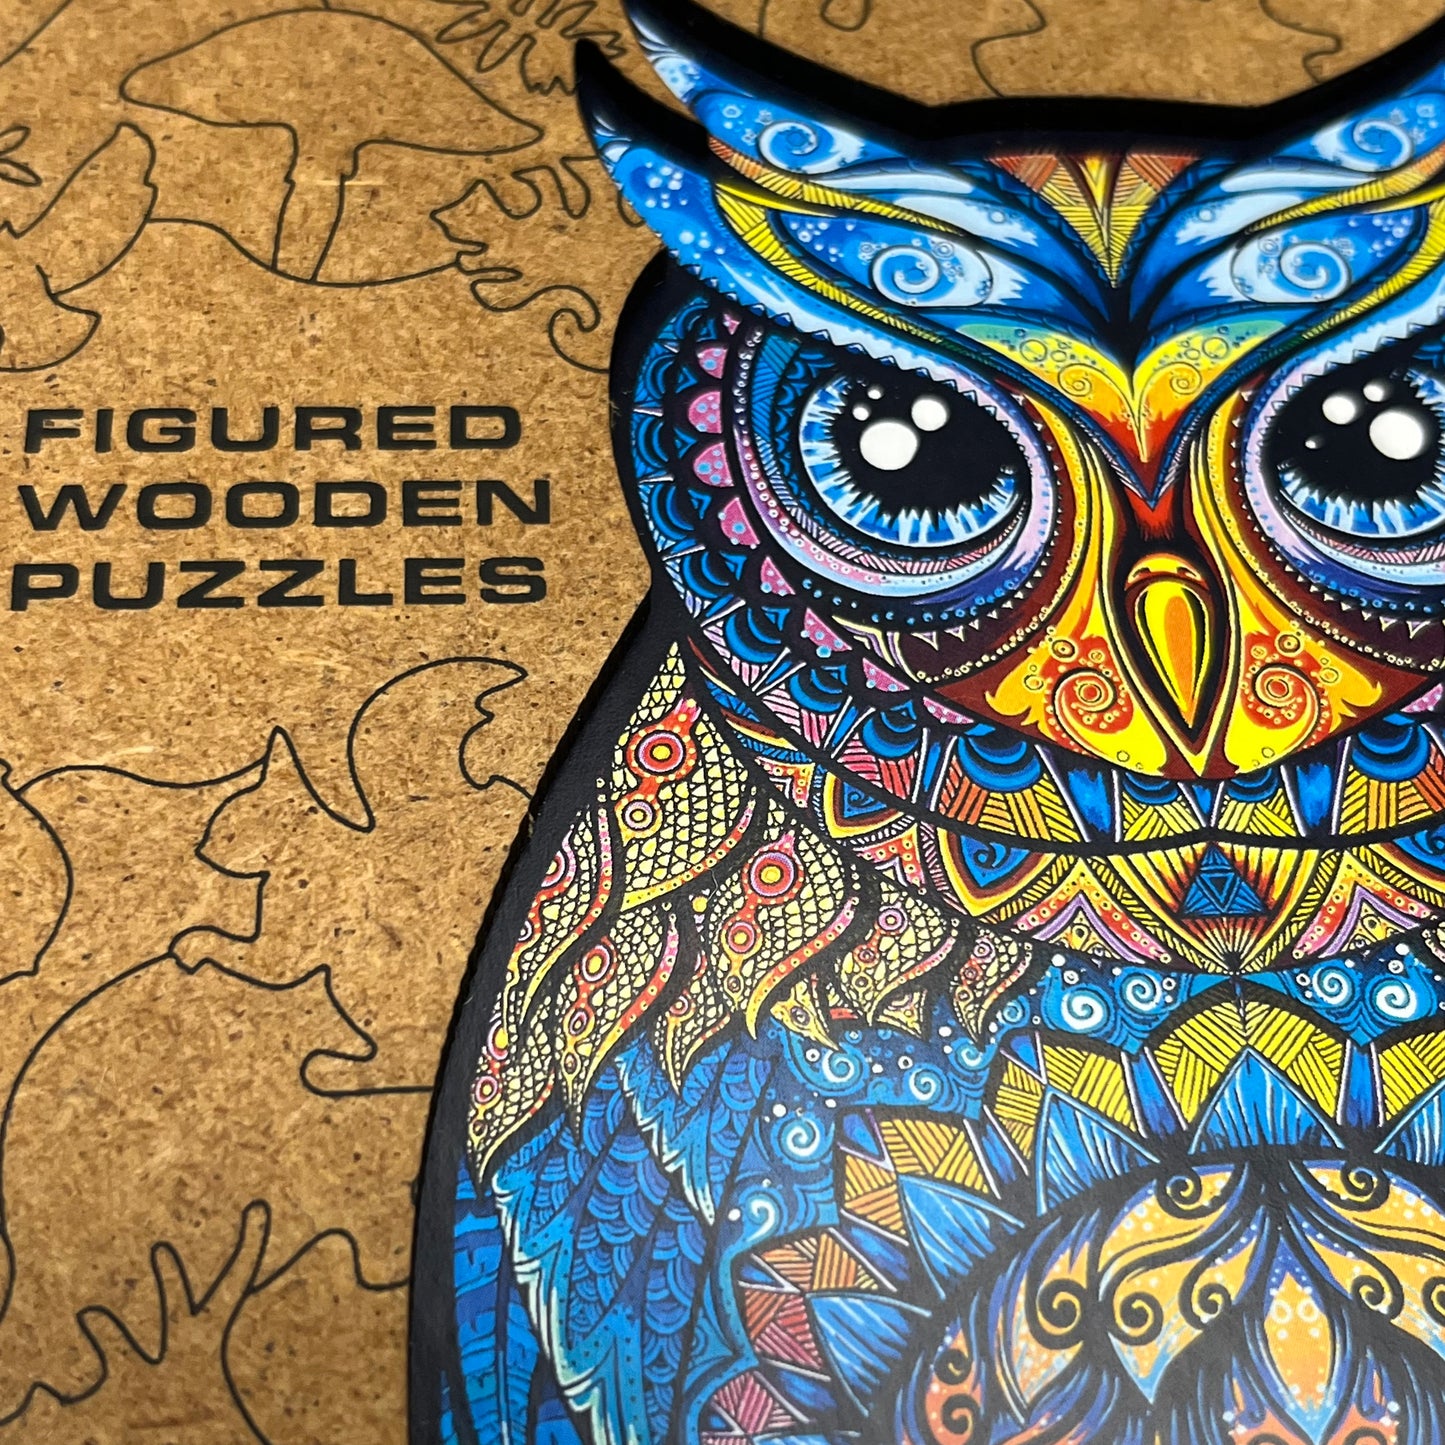 UNIDRAGON Charming Owl Complete Wooden Jigsaw Puzzle Medium 187 Pieces (New)